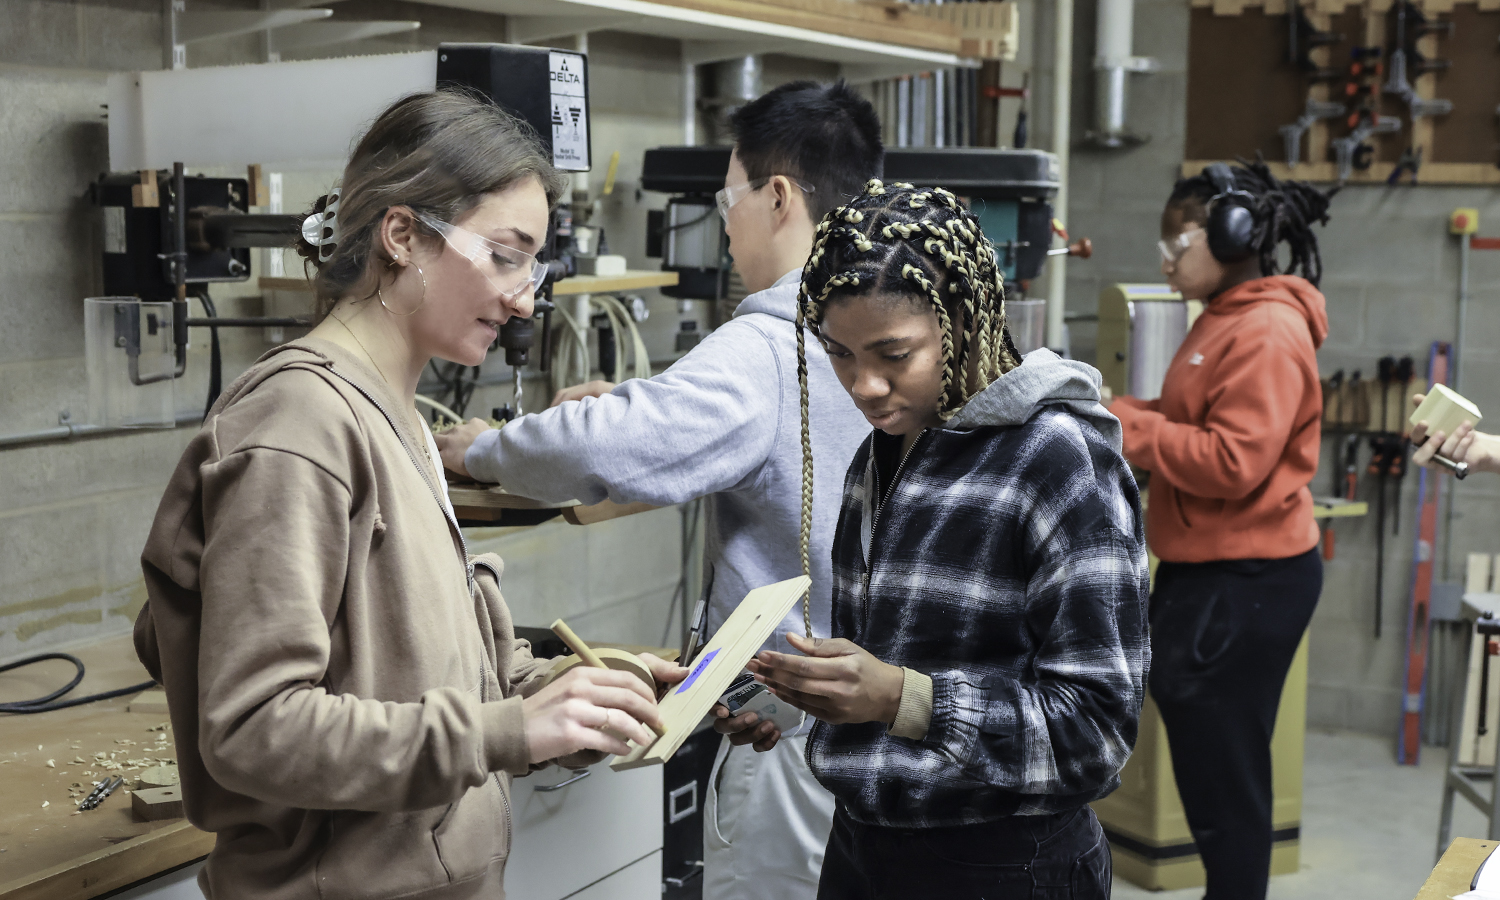 Cora Nagle ’24 discusses the music box she is making with Meleah Spriggs ’25. They are joined by Kevin Hsieh ’21 and Shante Frank ’25 in the woodworking lab of Stephen Blanchard.